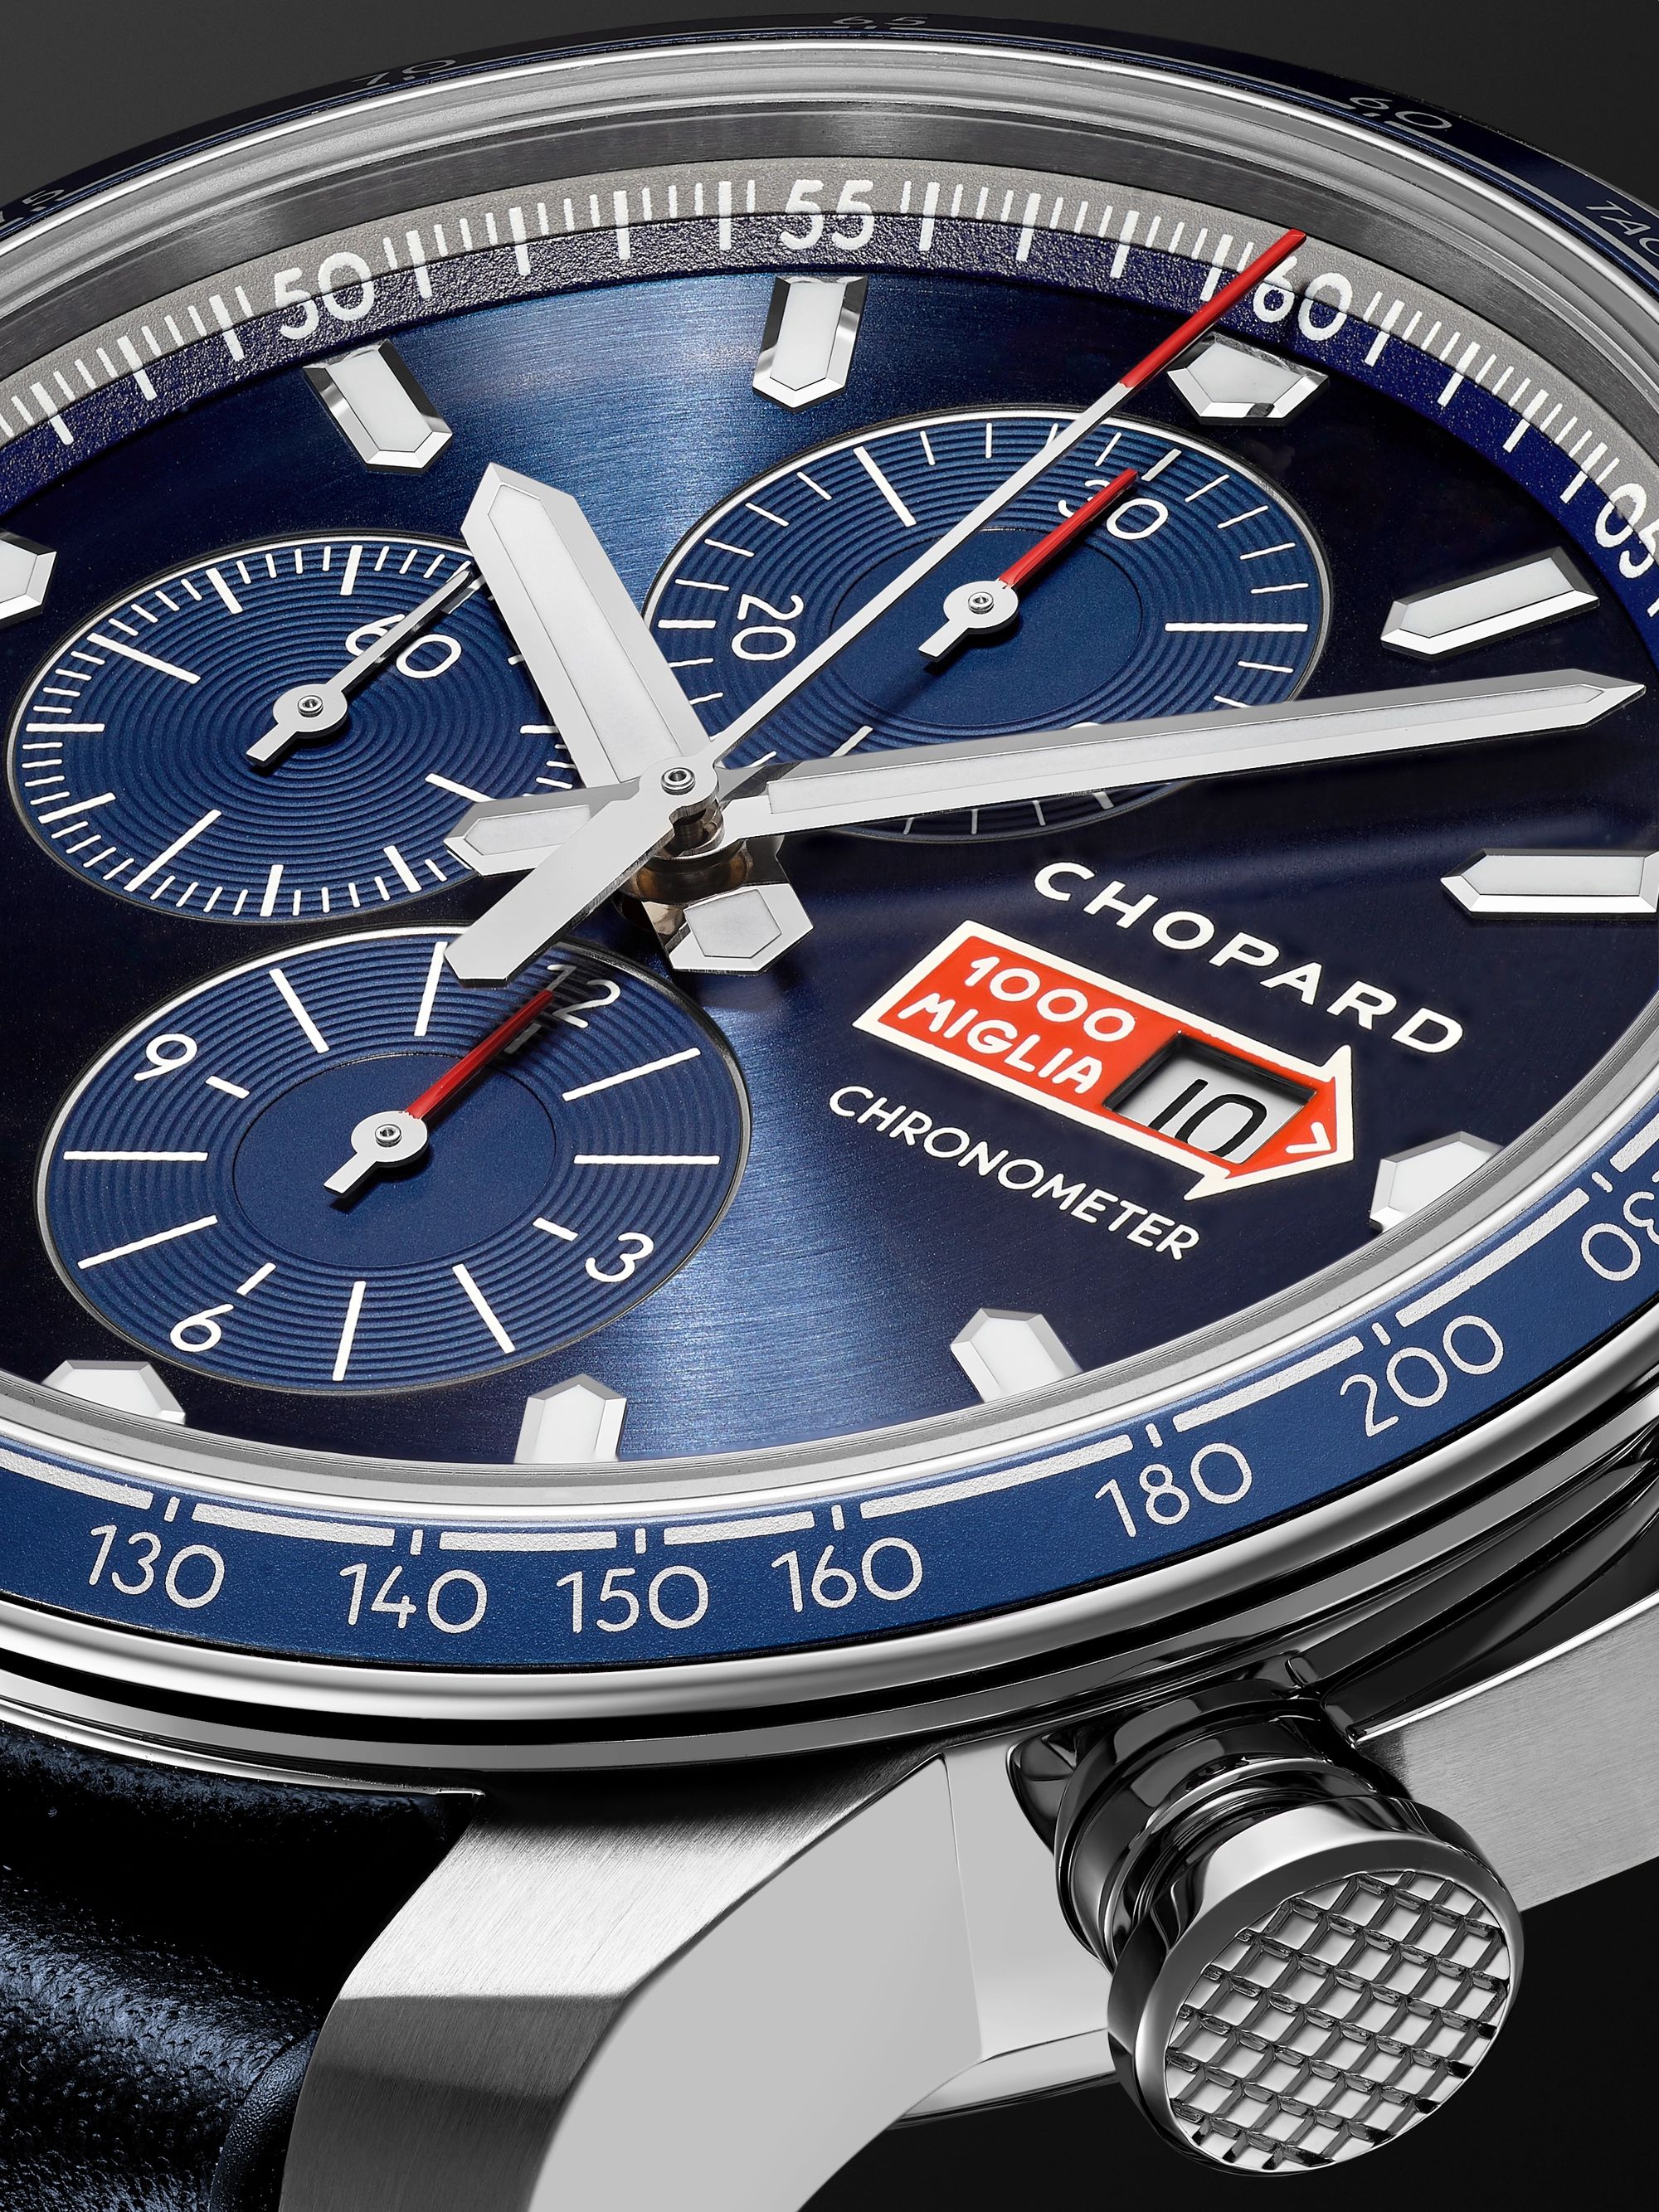 CHOPARD Mille Miglia GTS Azzurro Chrono Automatic Limited Edition 44mm Stainless Steel and Leather Watch, Ref. No. 168571-3007